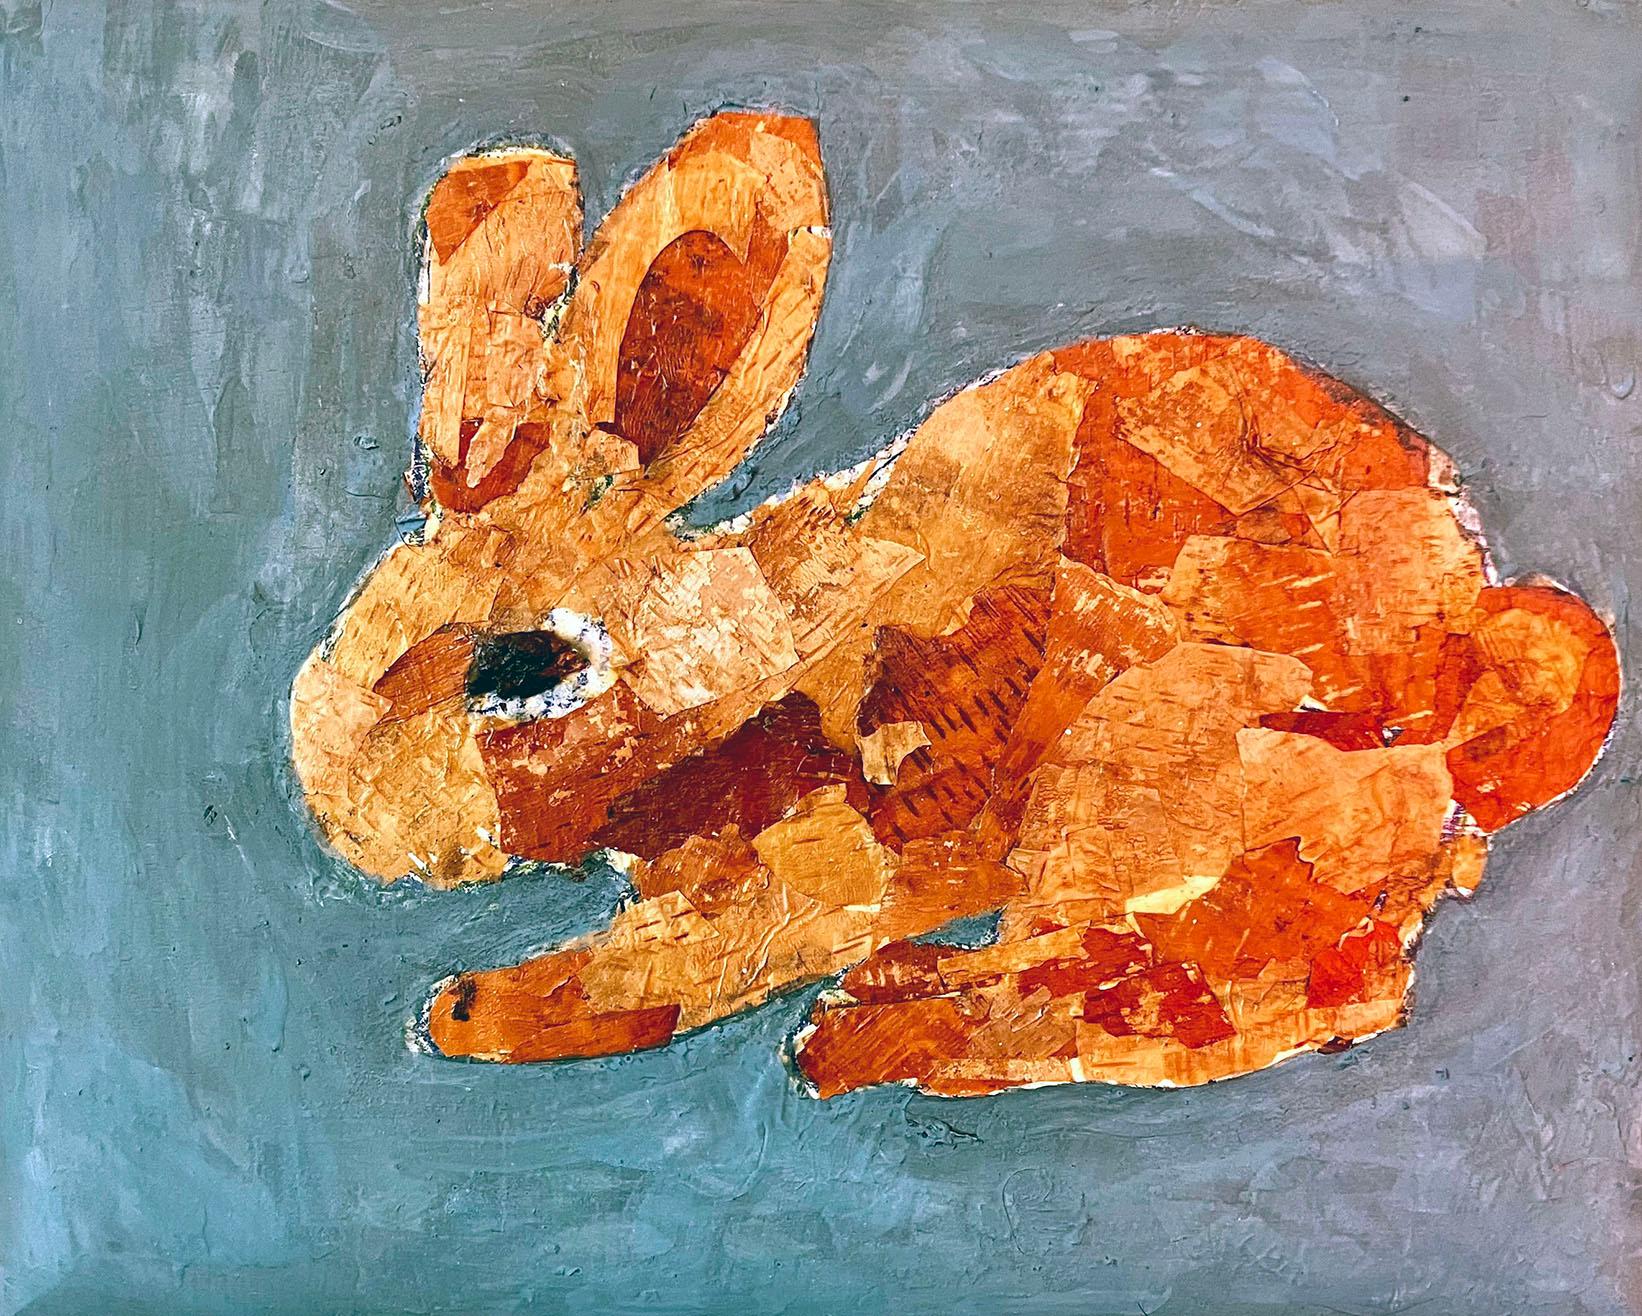 C. Dimitri Abstract Painting - Birch Rabbit I, bunny, orange color painted birch on wood trophy plaque